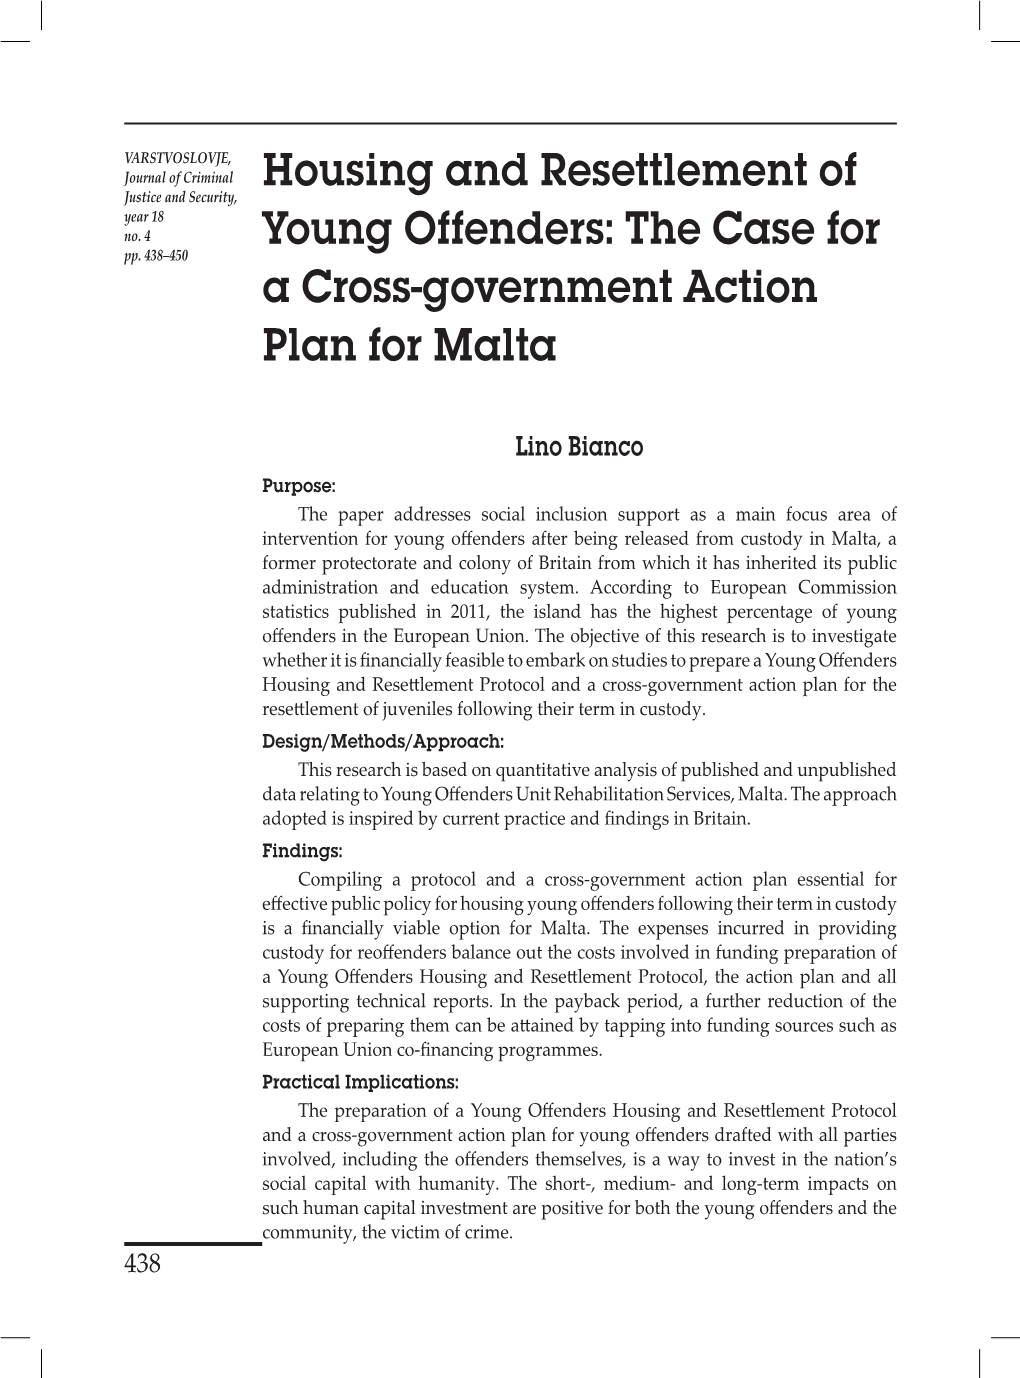 Housing and Resettlement of Young Offenders: the Case for a Cross